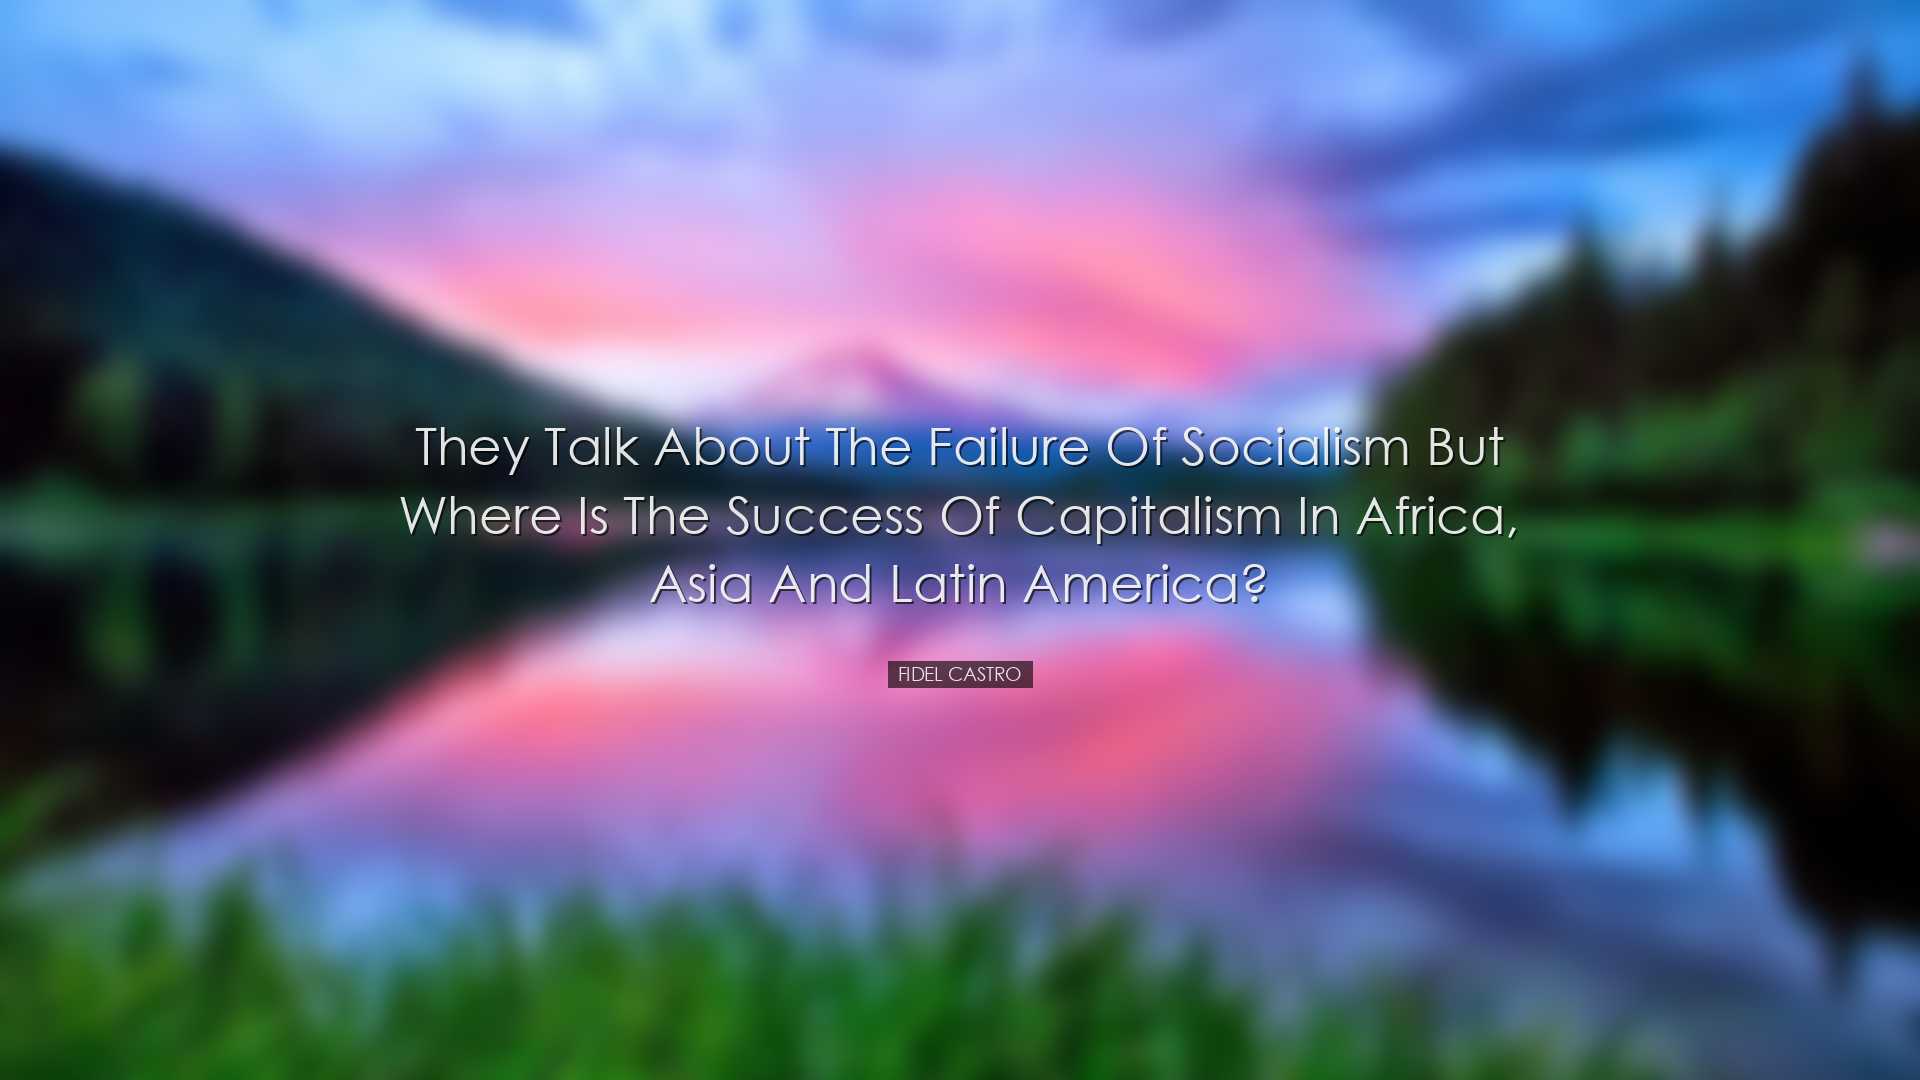 They talk about the failure of socialism but where is the success